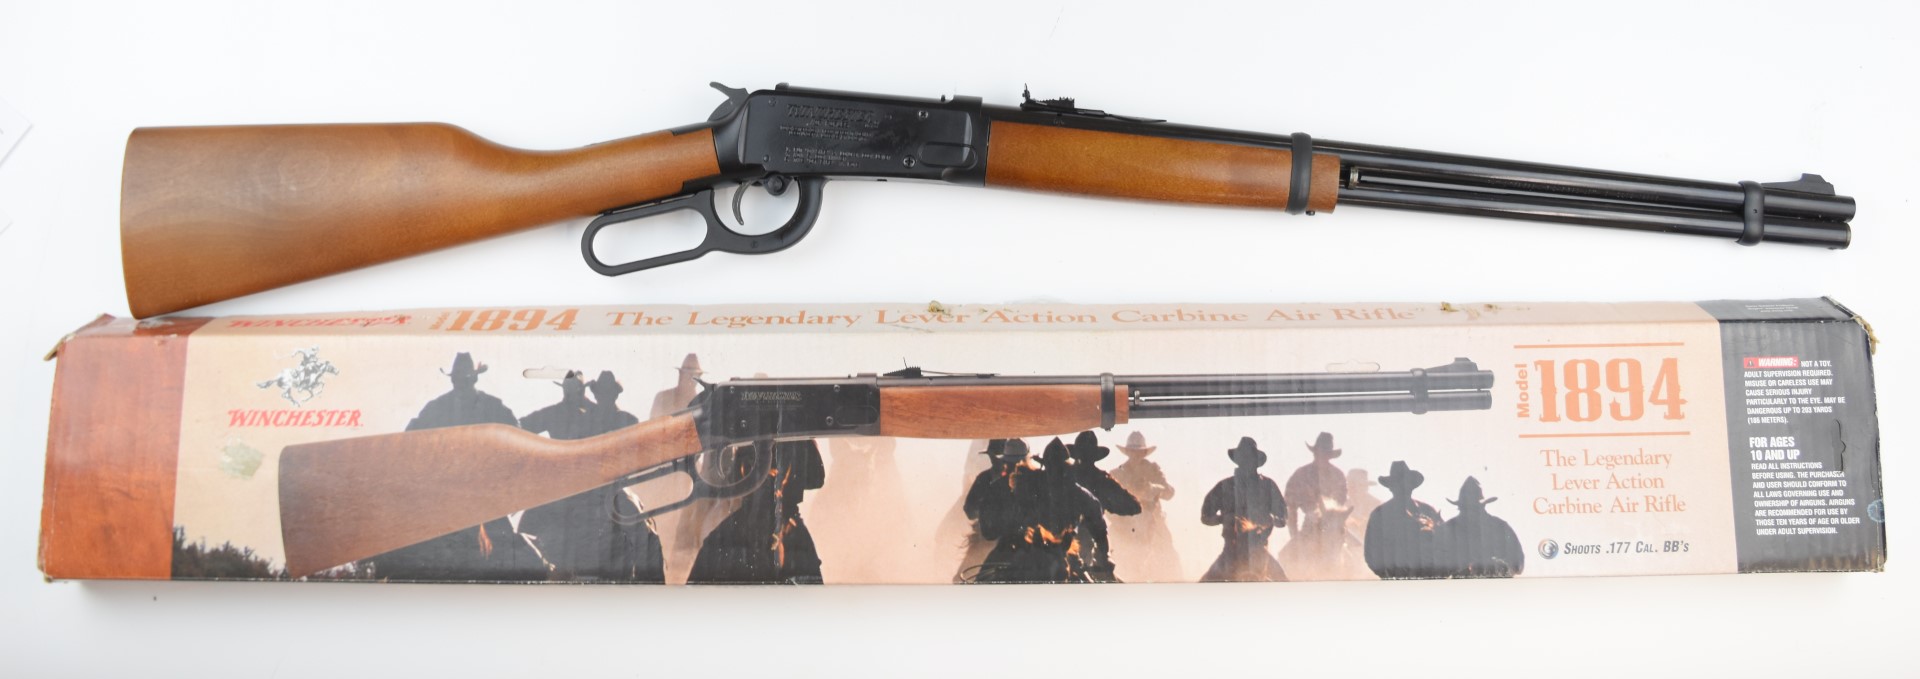 Winchester Model 1894 The Legendary Lever Action Carbine .177 under-lever air rifle with - Image 2 of 19